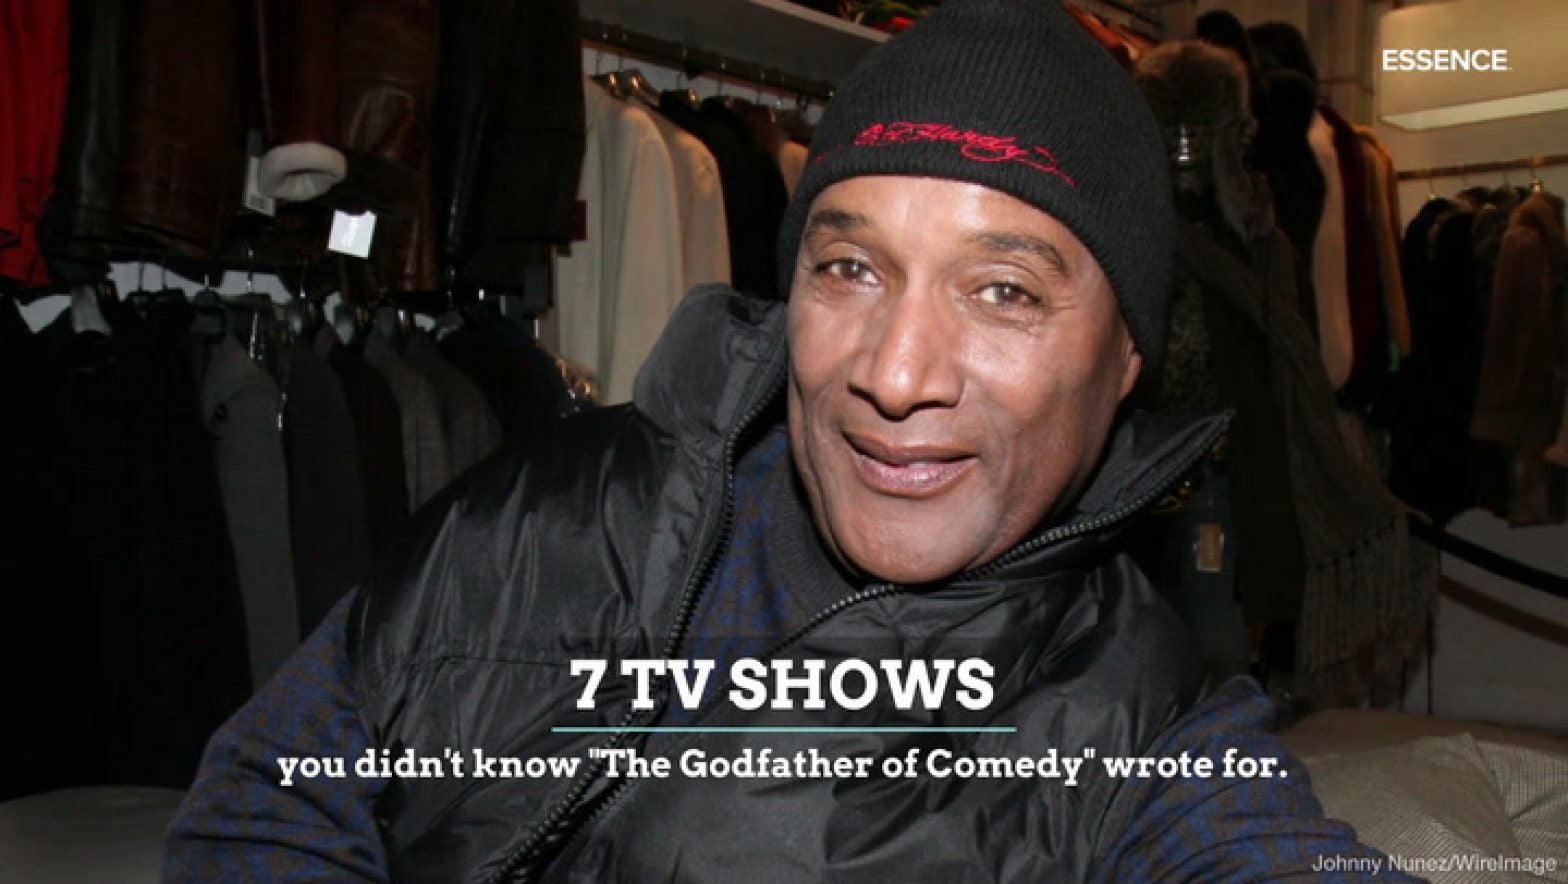 Shows You Didn’t Know Paul Mooney wrote for